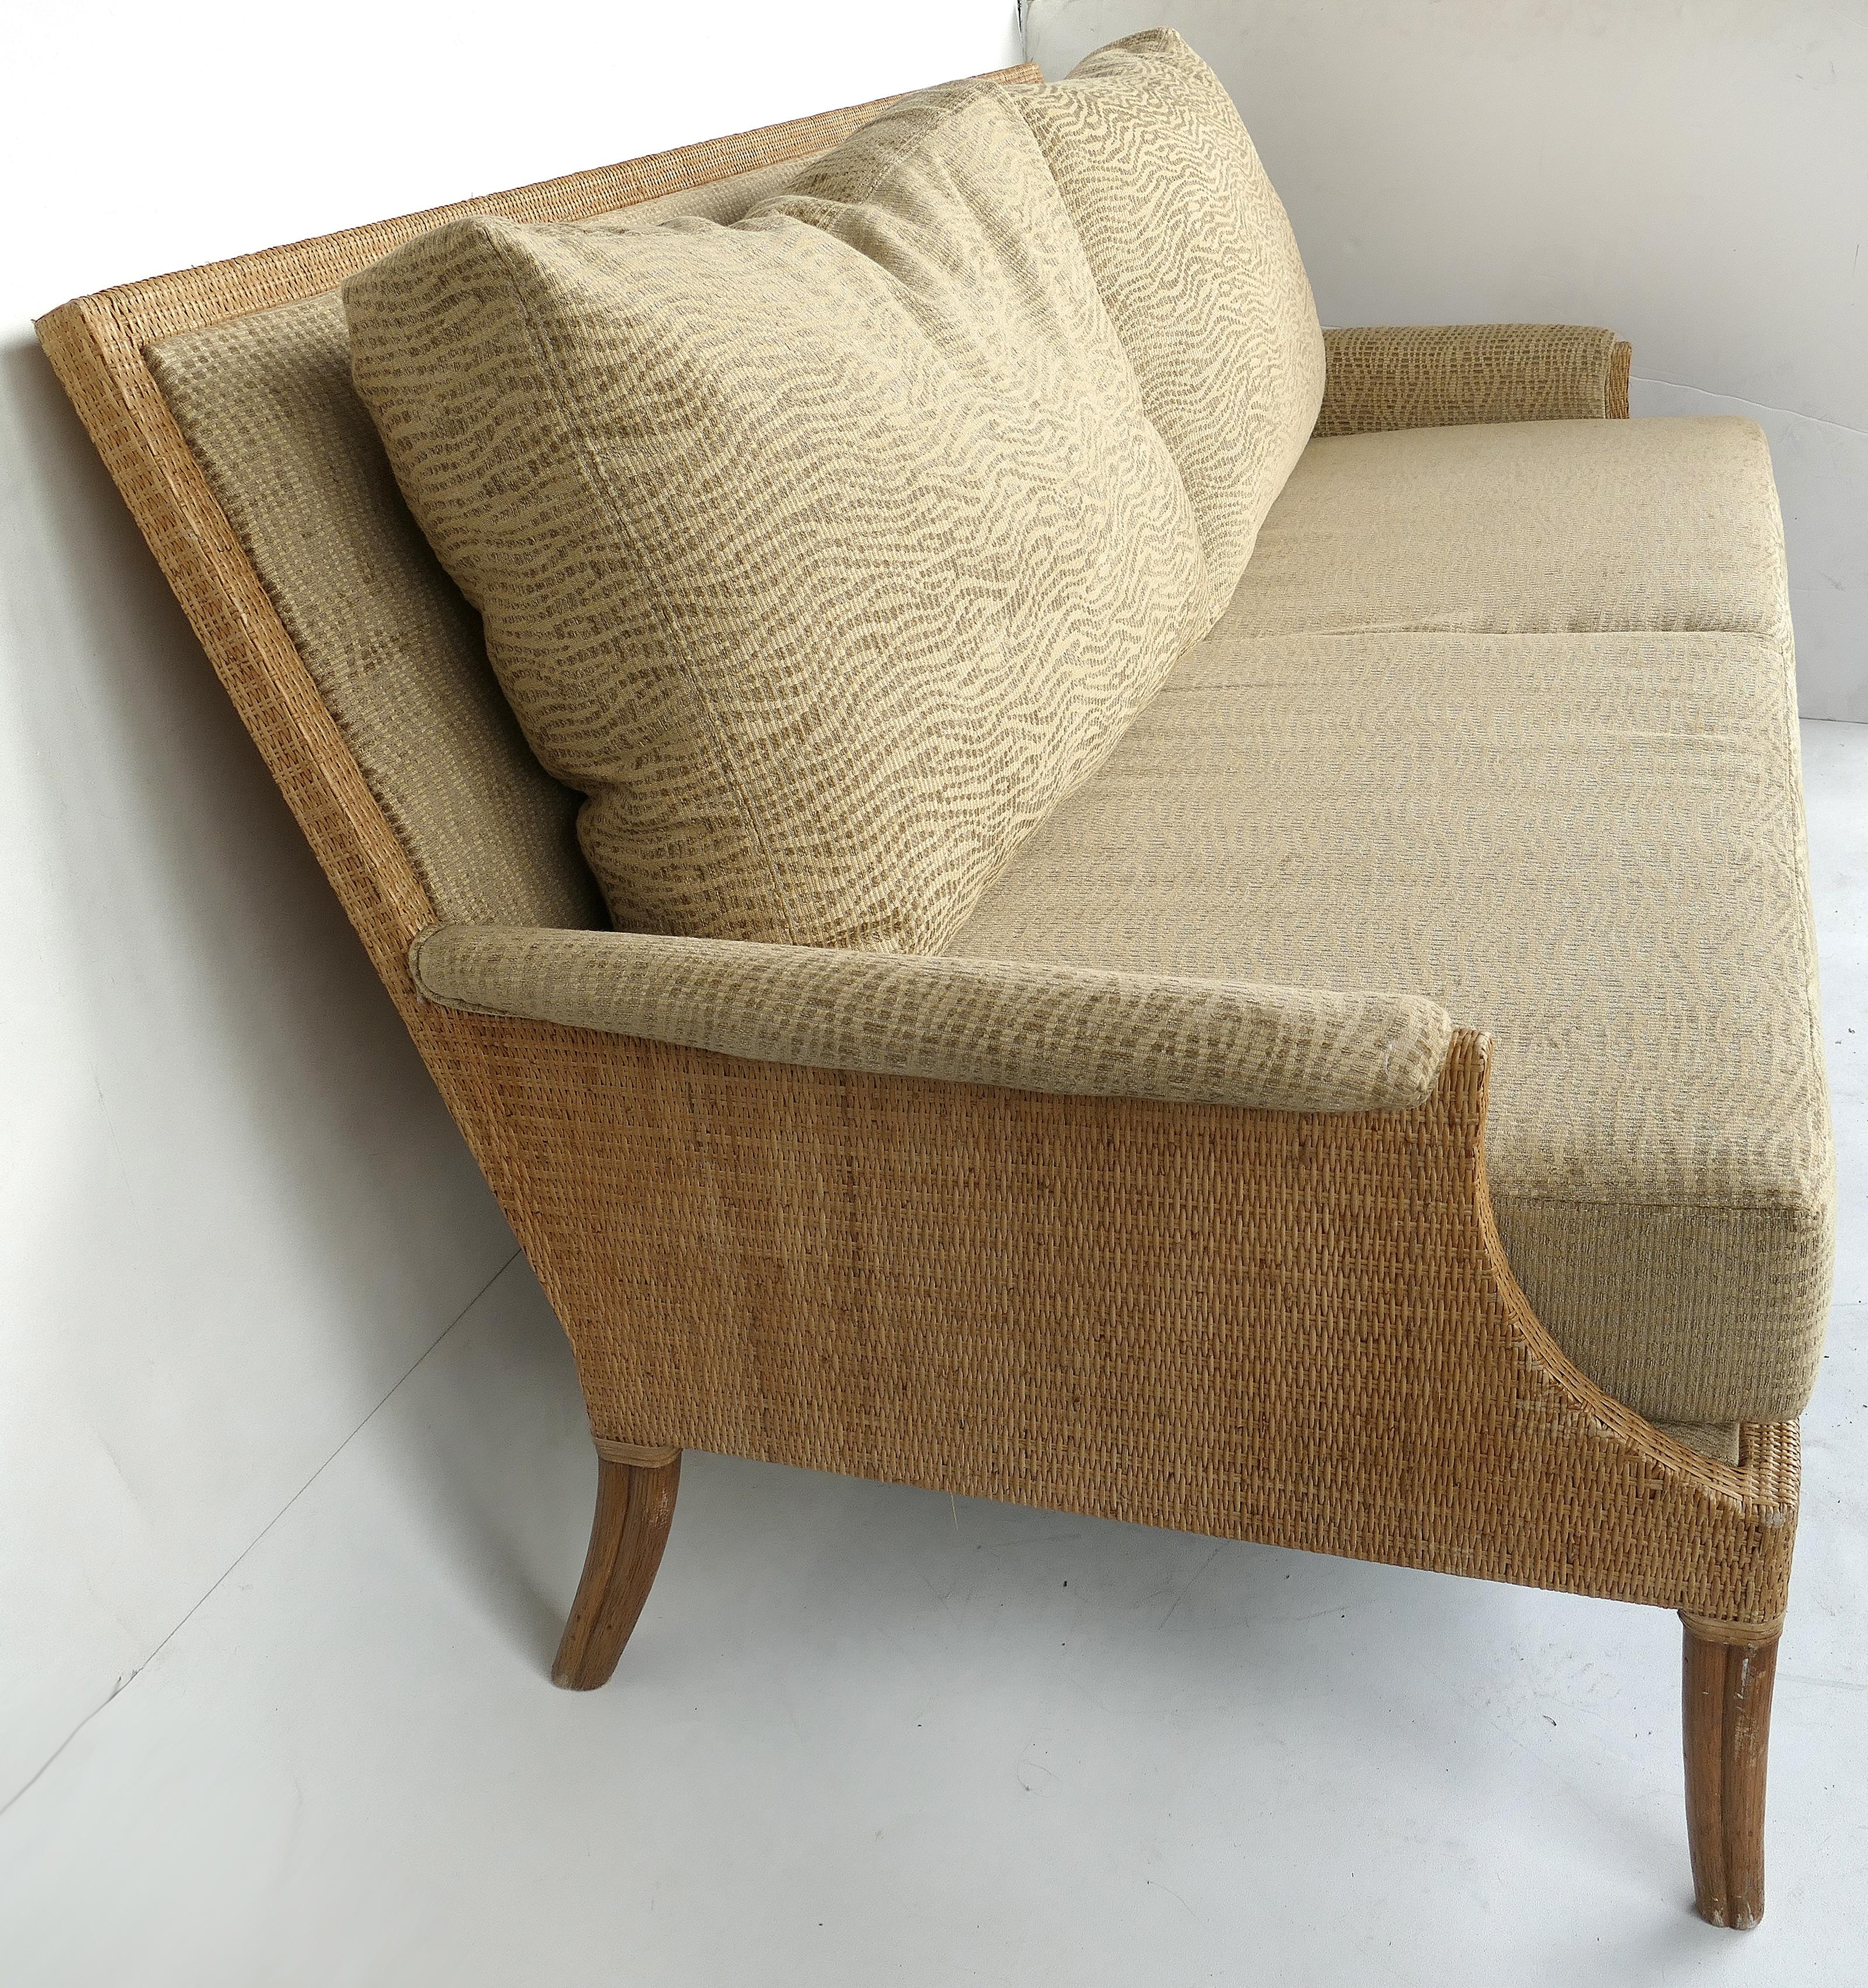 Orlando Diaz for Azcuy McGuire Furniture Reed sofa 

Offered for sale is a McGuire Furniture of San Francisco reed and wood sofa designed by Orlando Diaz Azcuy. This deep and comfortable sofa has woven reed sides and back supported by a wood base.